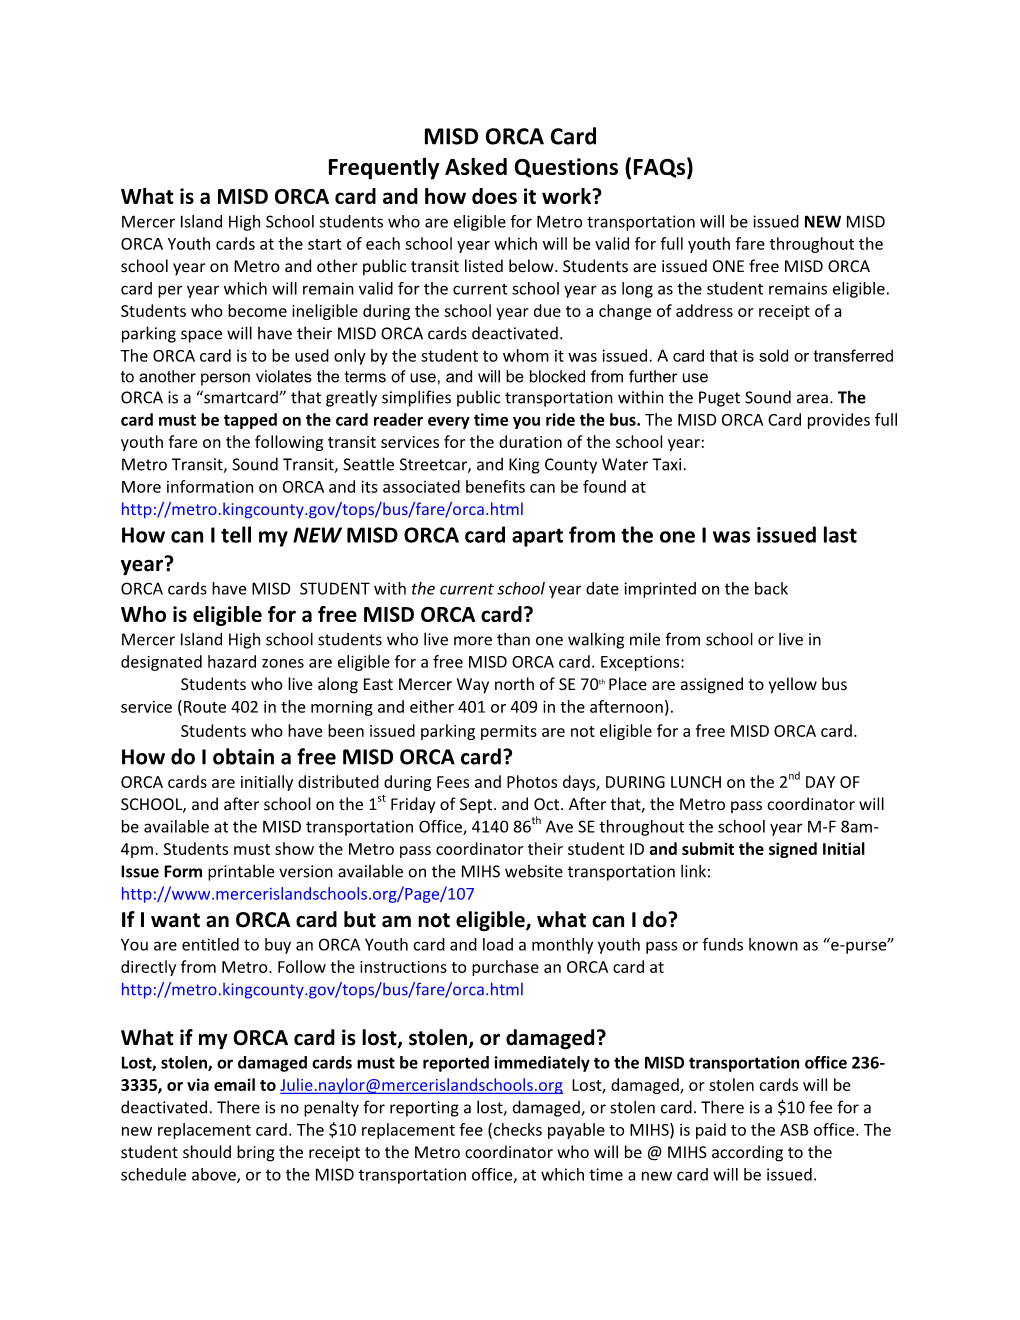 MISD ORCA Card Frequently Asked Questions (Faqs)